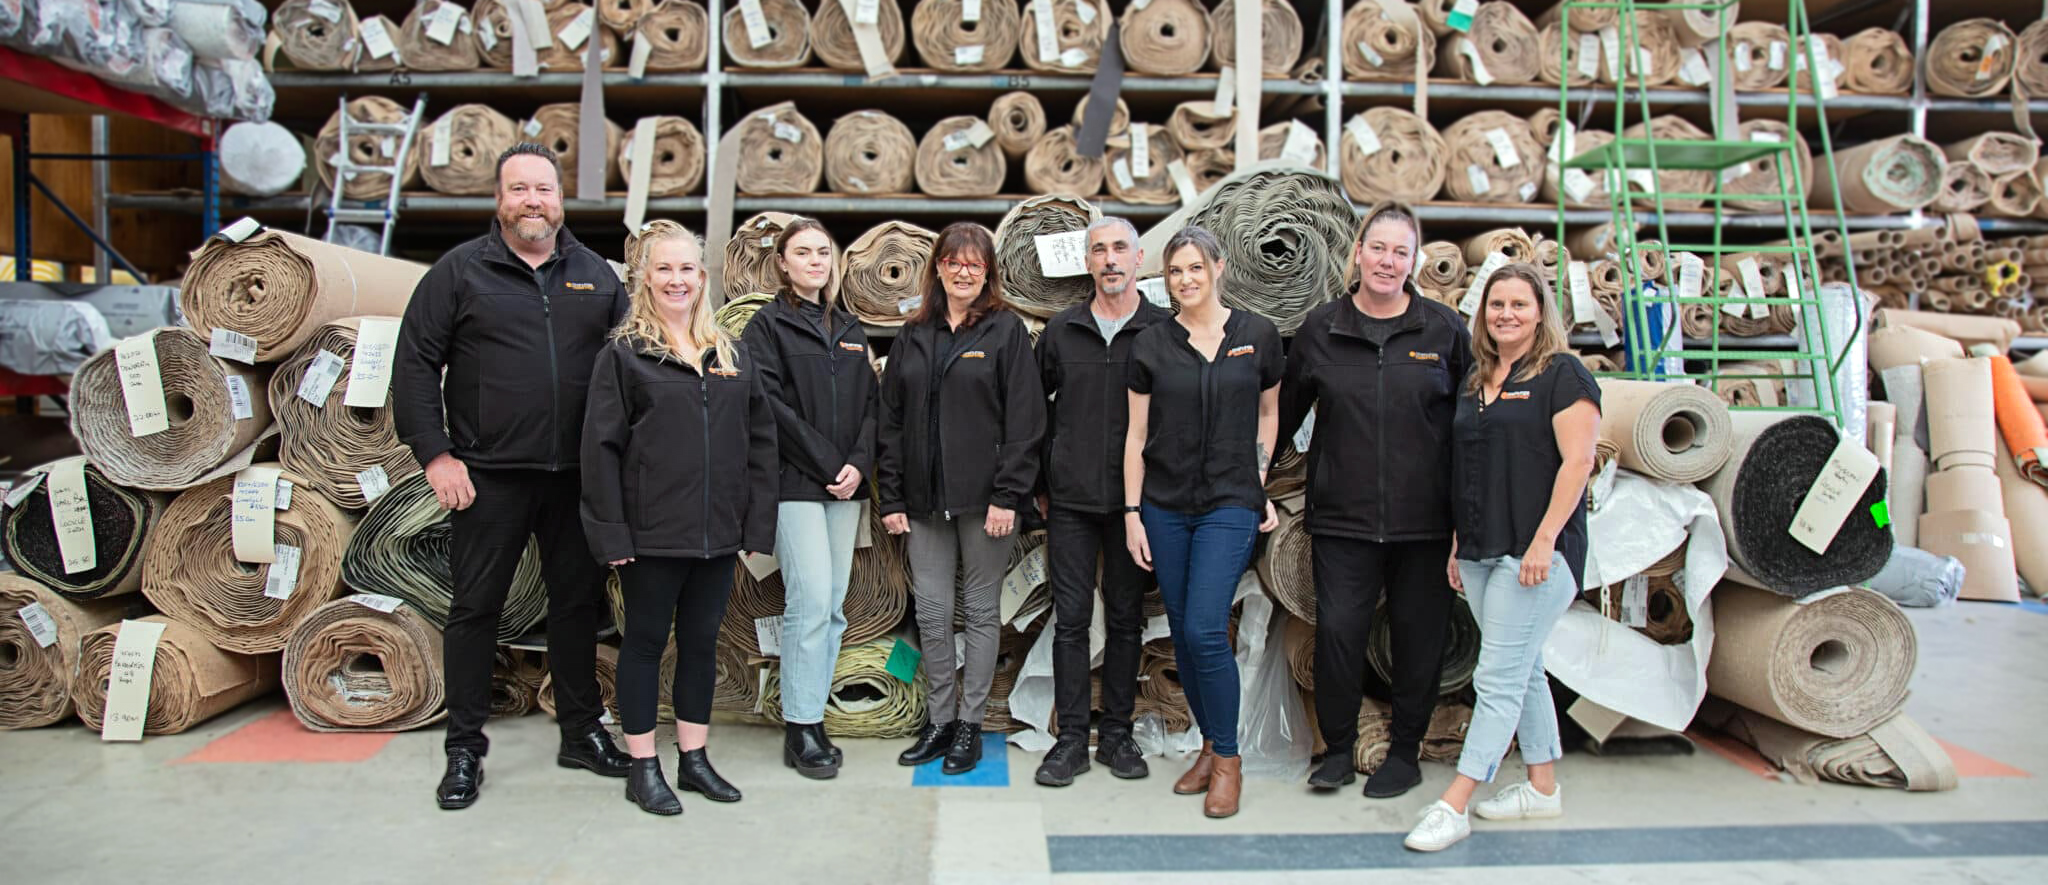 The team at Onehunga Carpets and Rugs